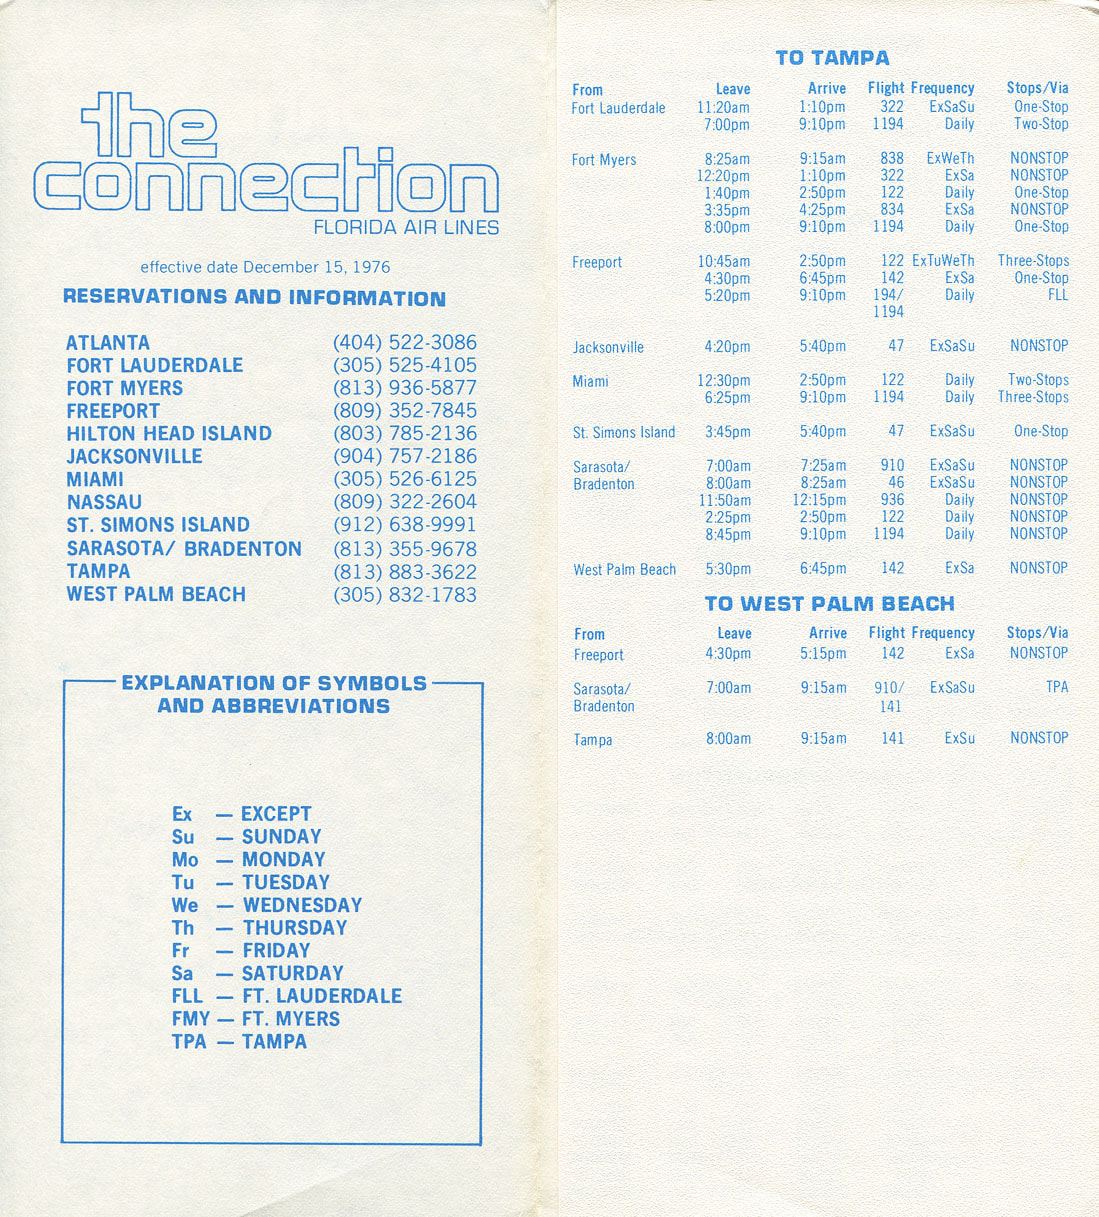 Florida Air Lines timetable